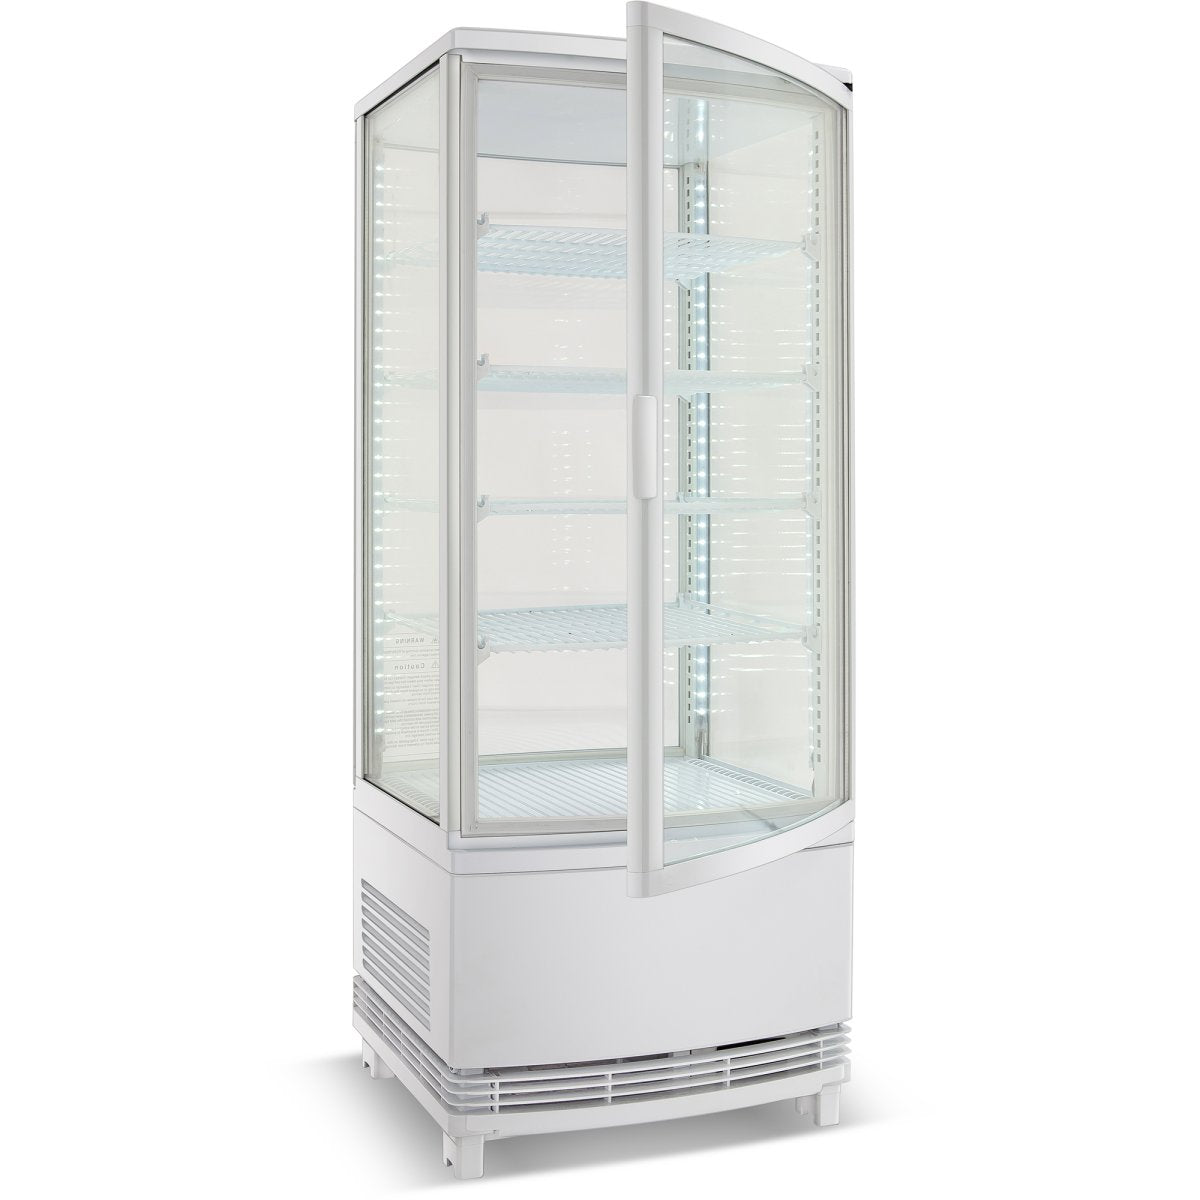 Countertop Display Fridge 98 litres 4 shelves White 2 curved doors front & back Hire